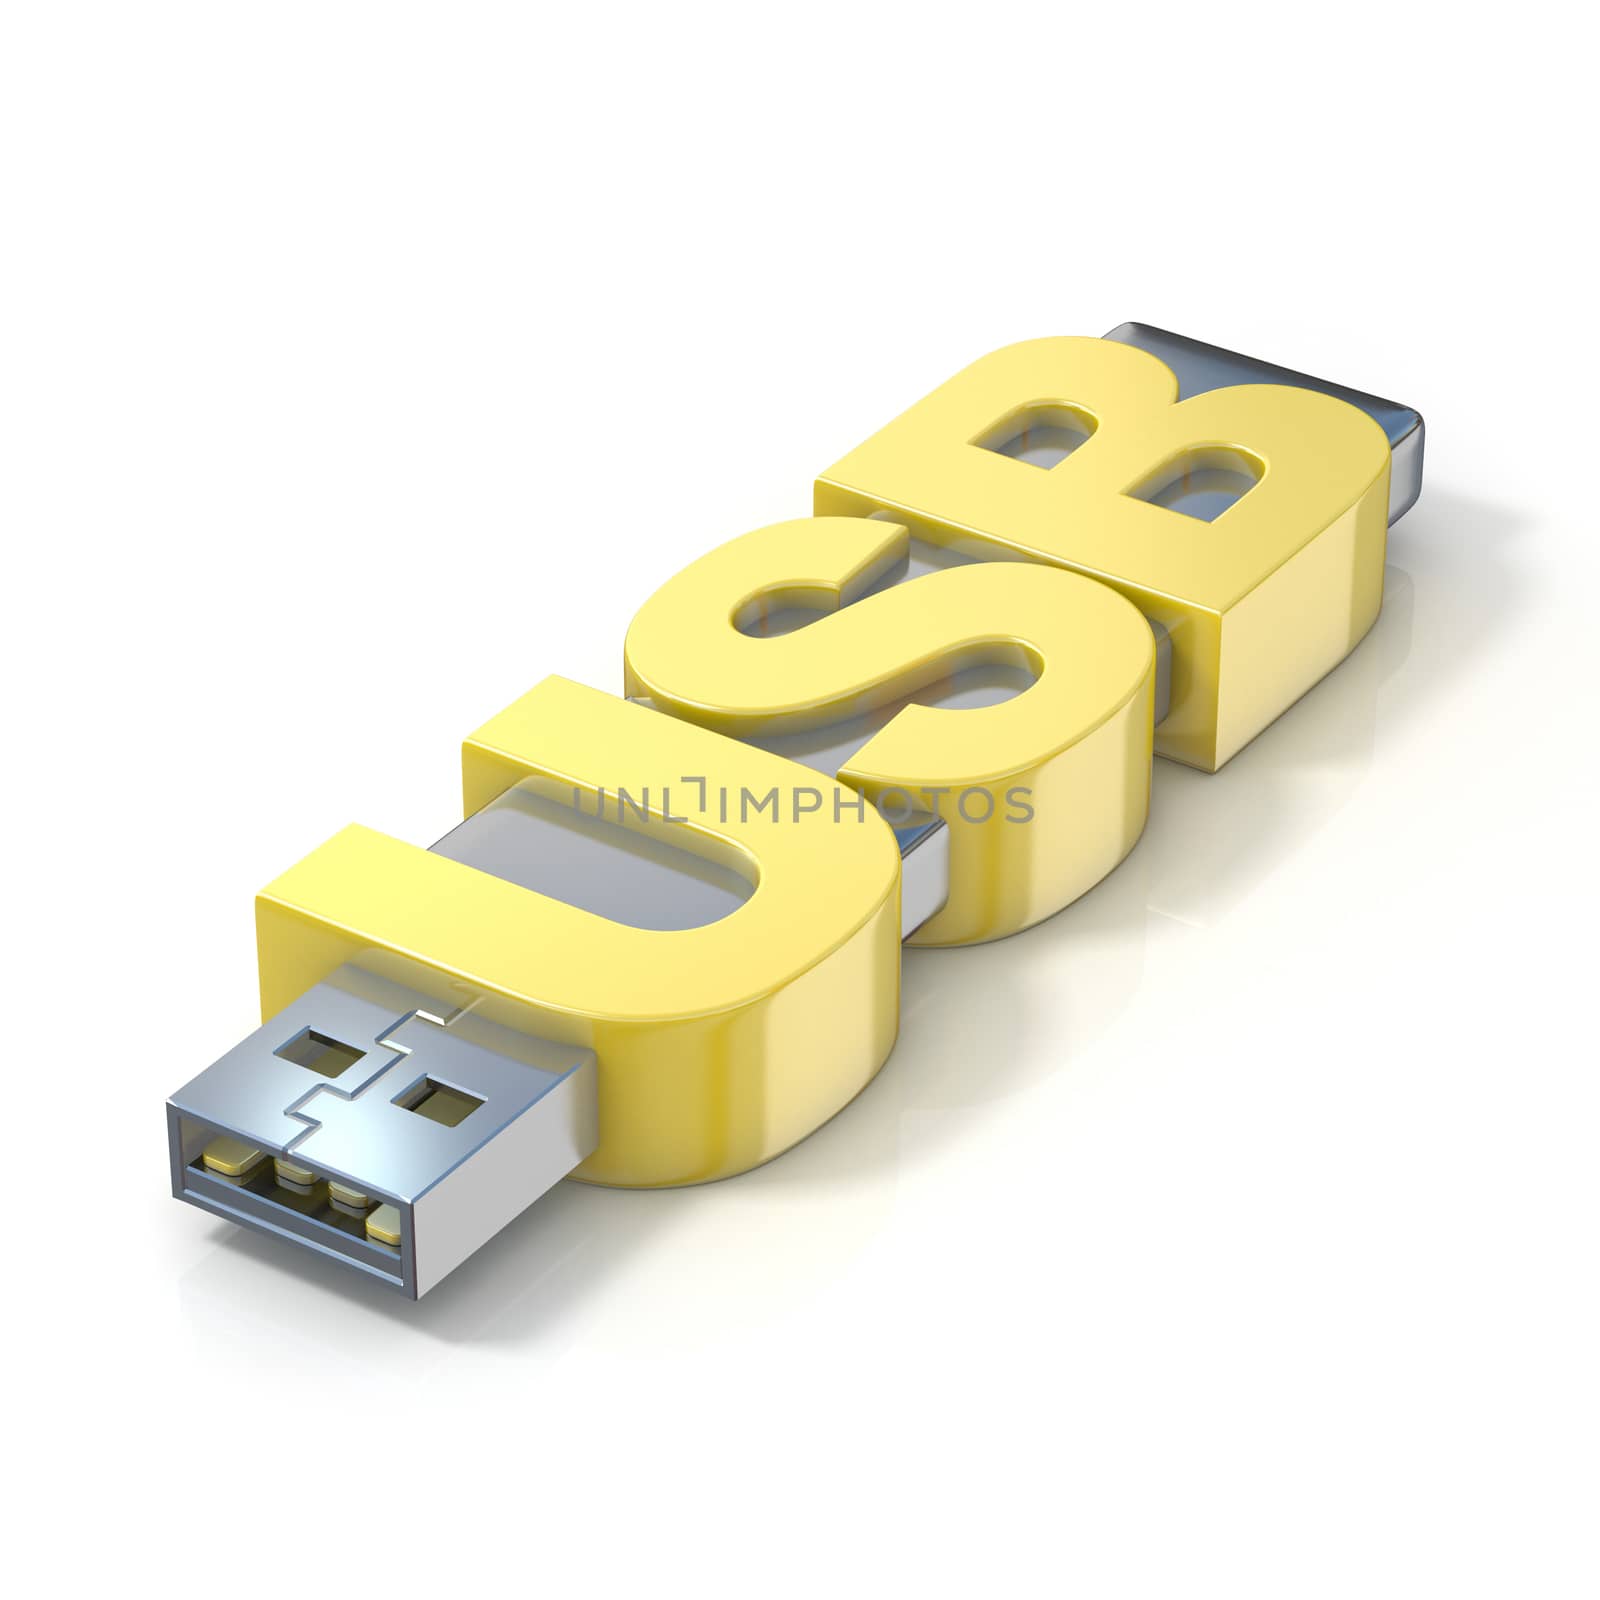 USB flash memory, made with the word USB. 3D render illustration isolated on white background